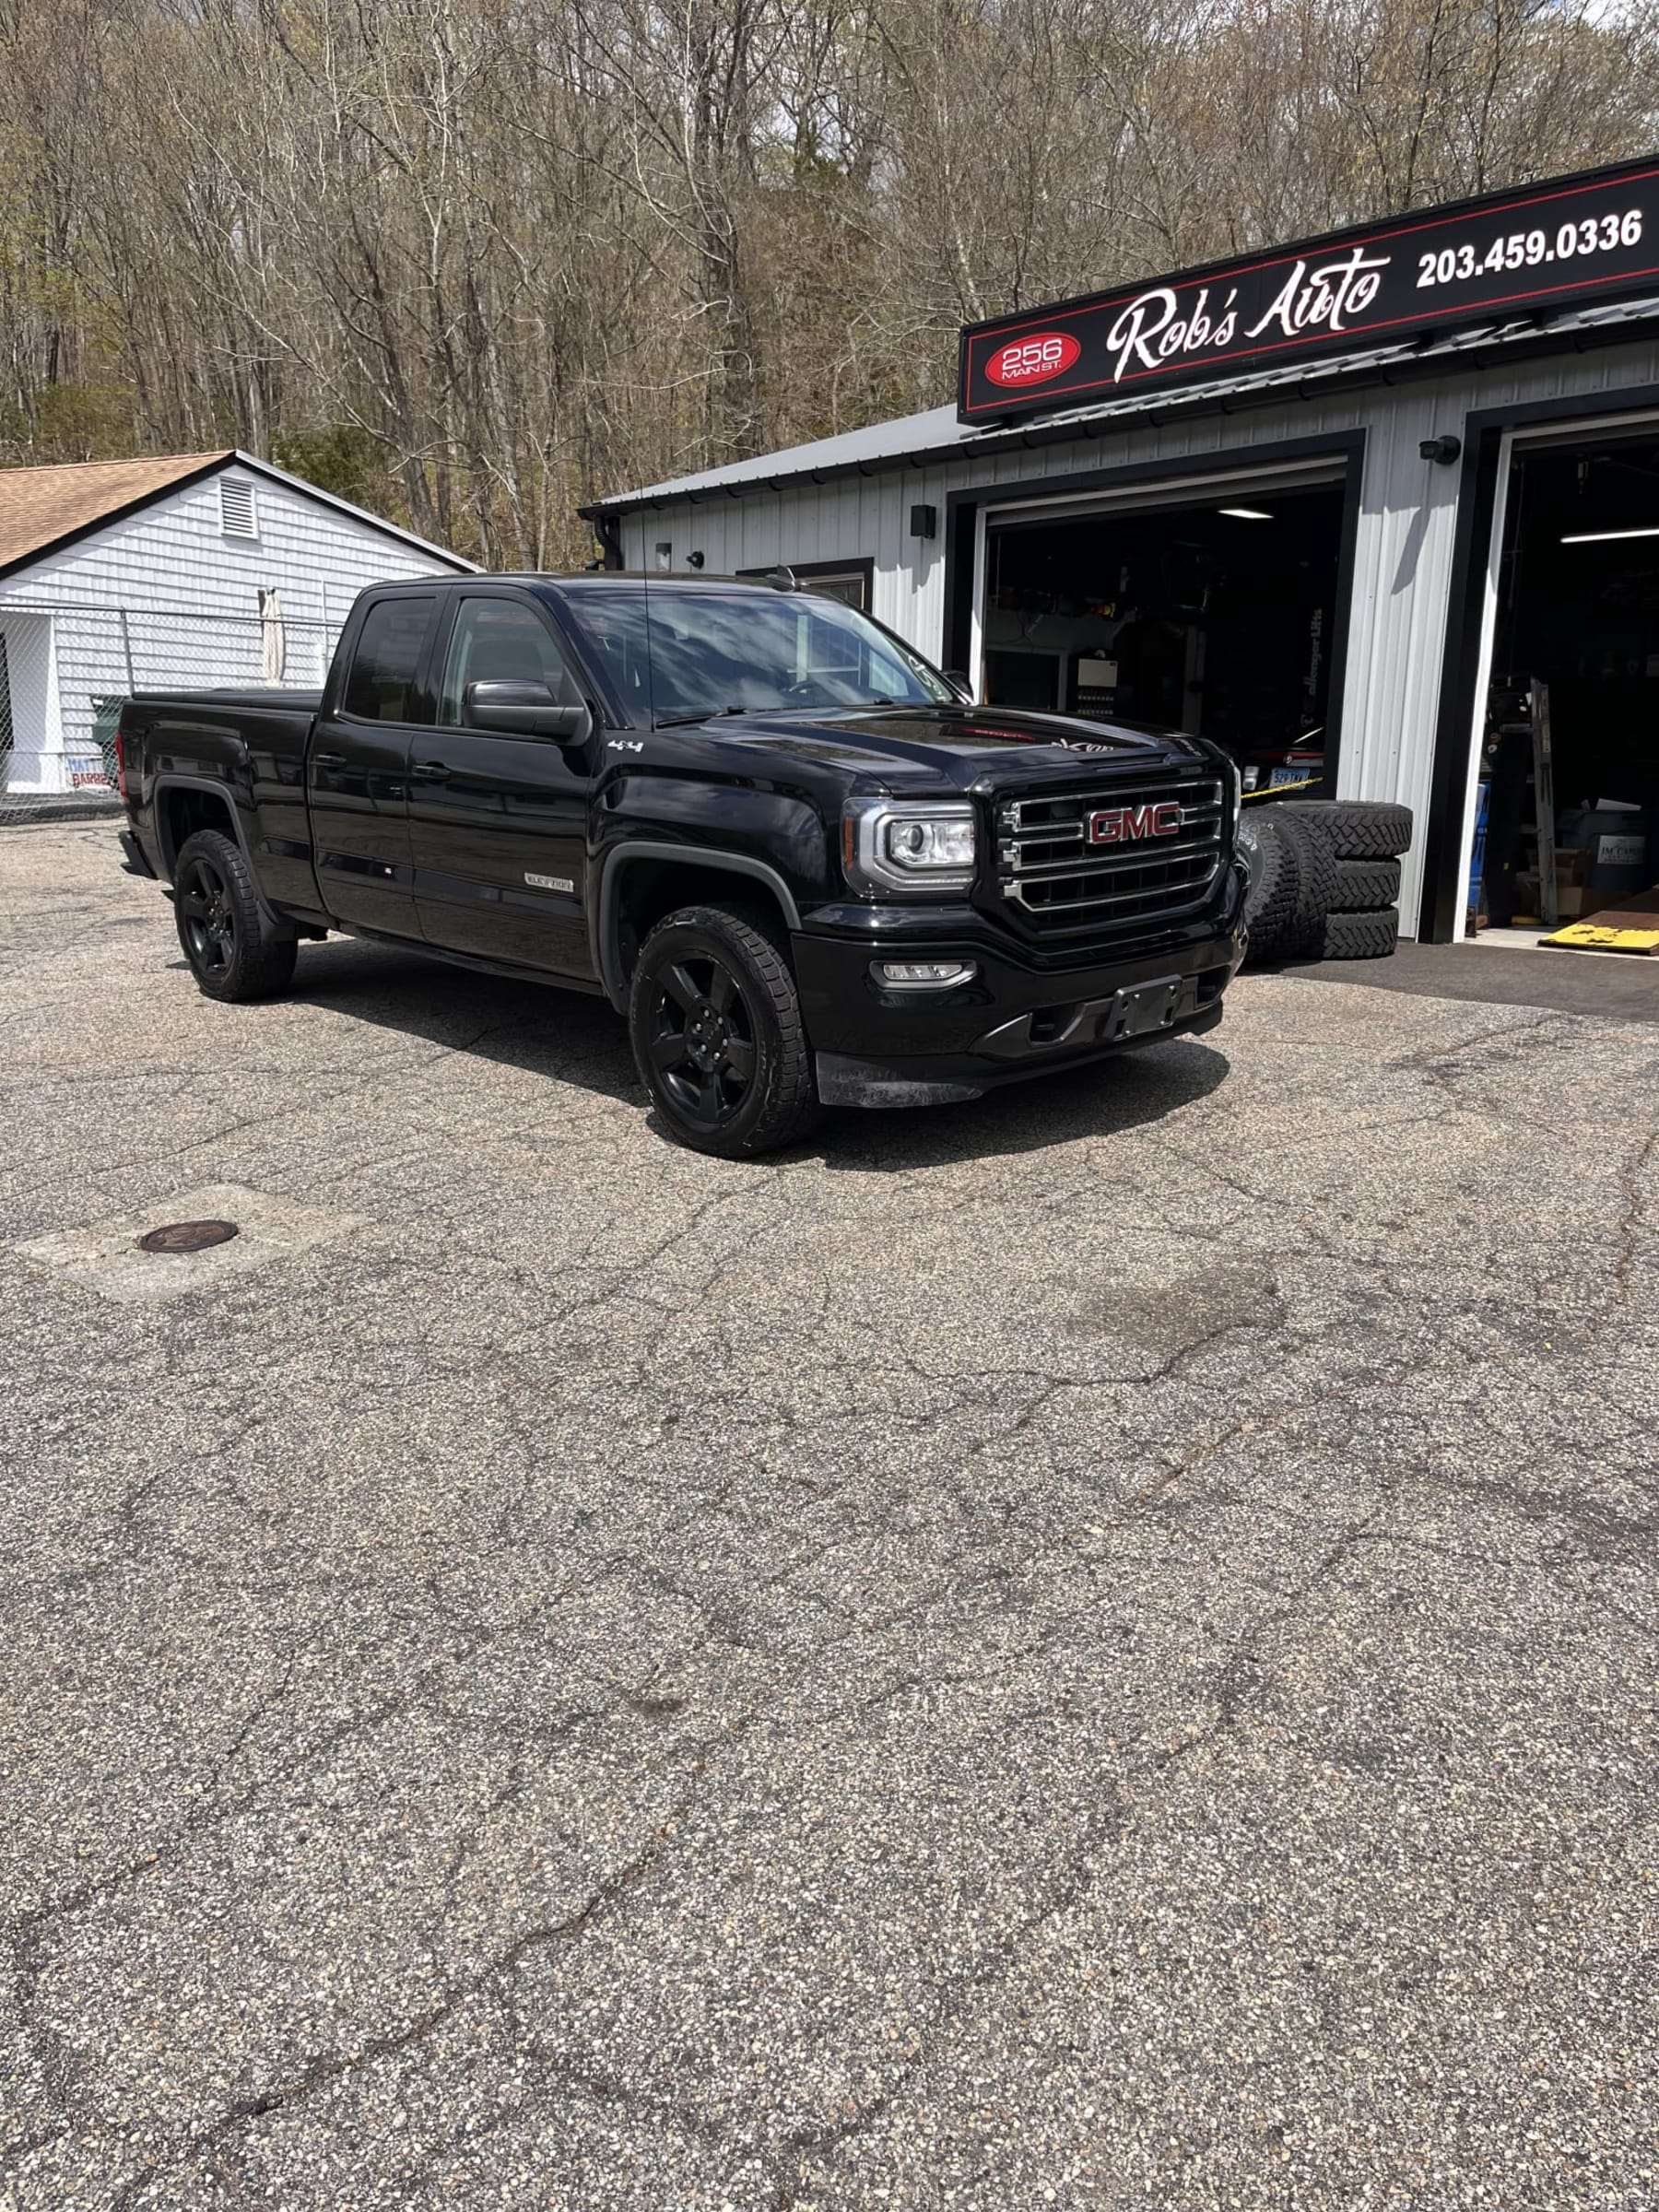 NEW ARRIVAL!! 2017 GMC Sierra 1500 DBL cab Elevation package!! Clean carfax! 4x4!! Only 86,700 miles! Runs and drives great!! Priced well below retail value!! Won’t last at only $20,900